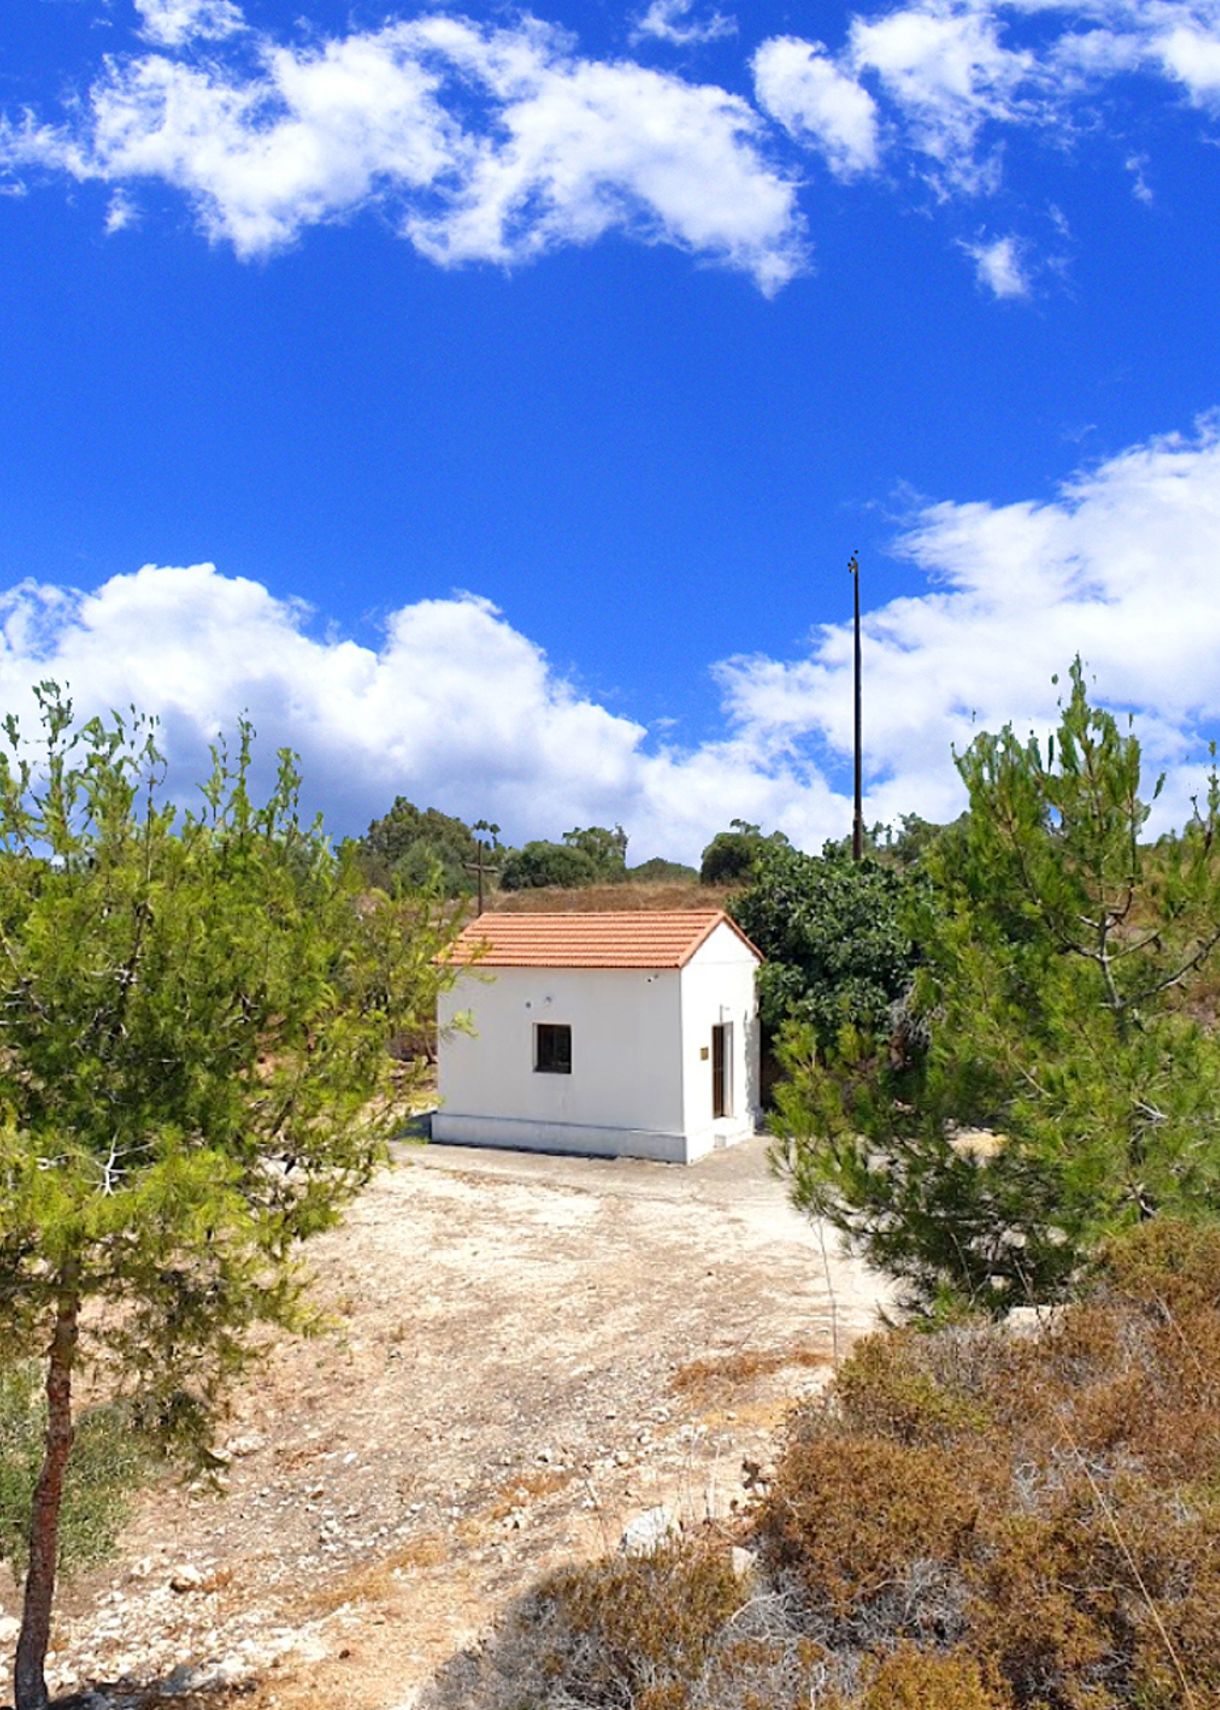 Panagia-Agiois Ioannis Trail in Cyprus